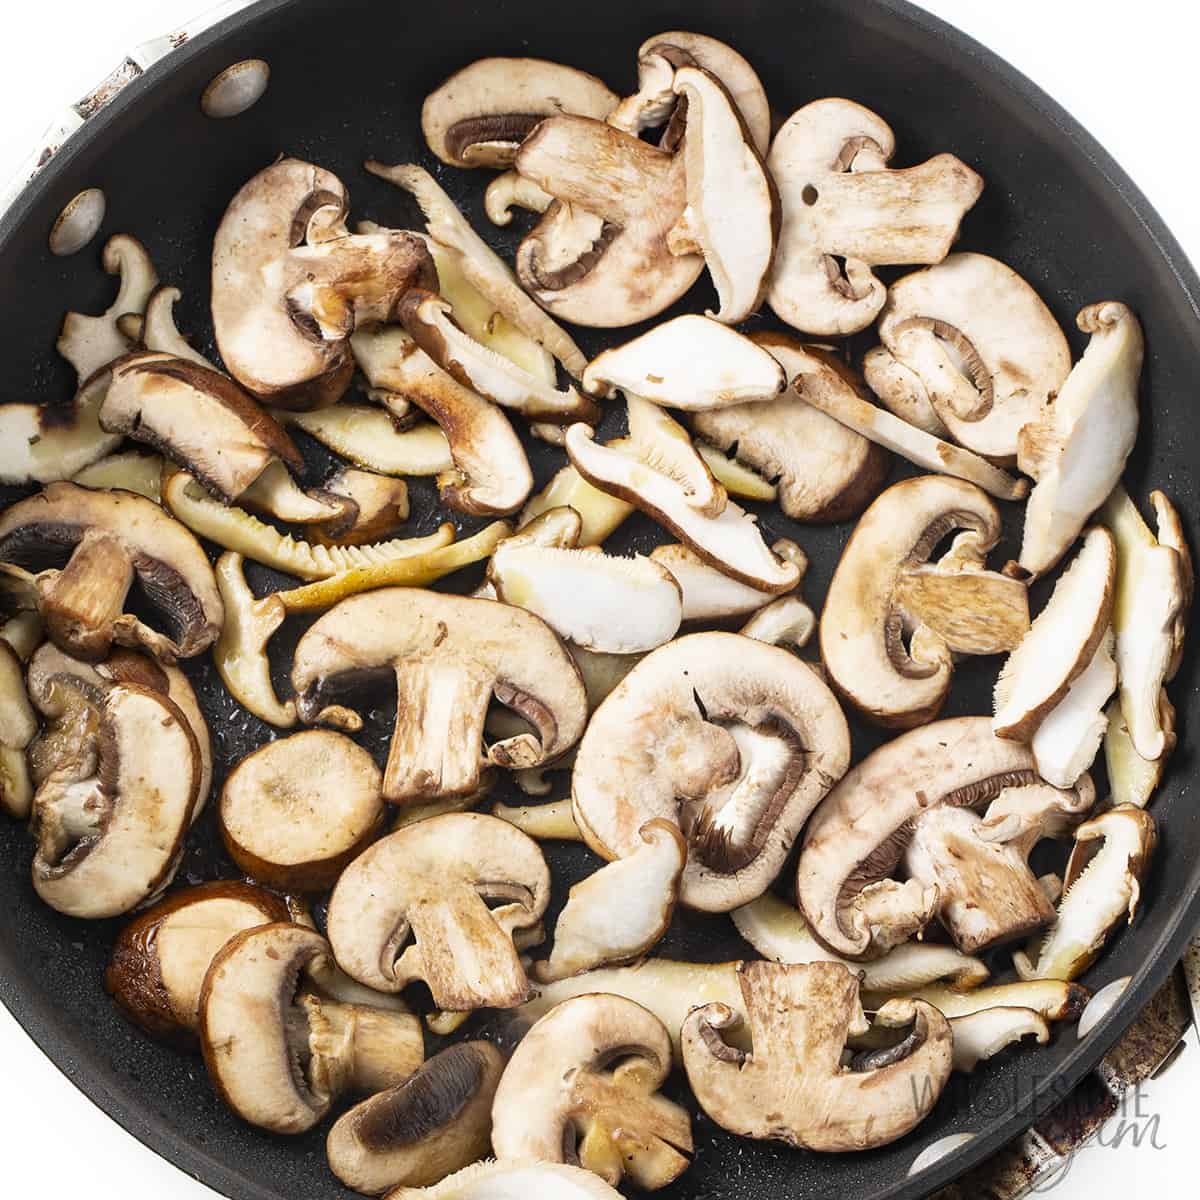 First batch of mushrooms in pan, in a single layer.